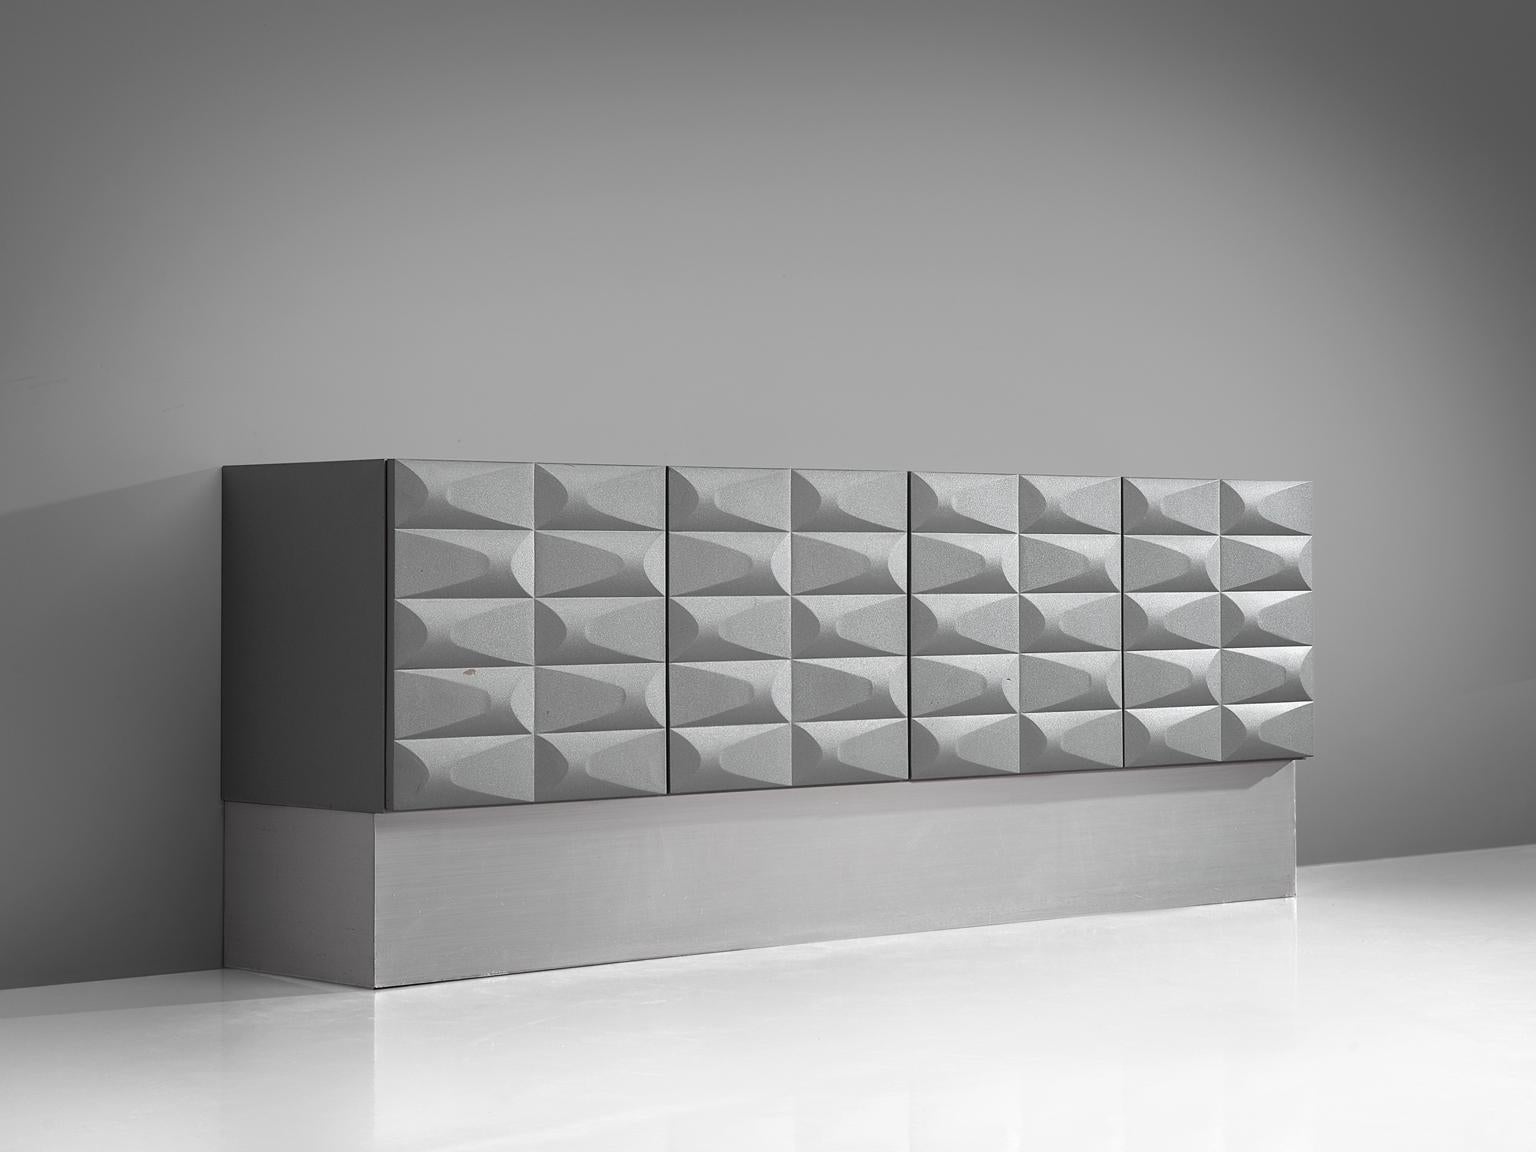 Brutalist credenza, wood and aluminum, European, 1970s. 

Modern and clean two-door sideboard. Two door panels, each with an exceptional three-dimensional pattern executed in a soft grey tone. The continuous pattern gives this bar-cabinet a very